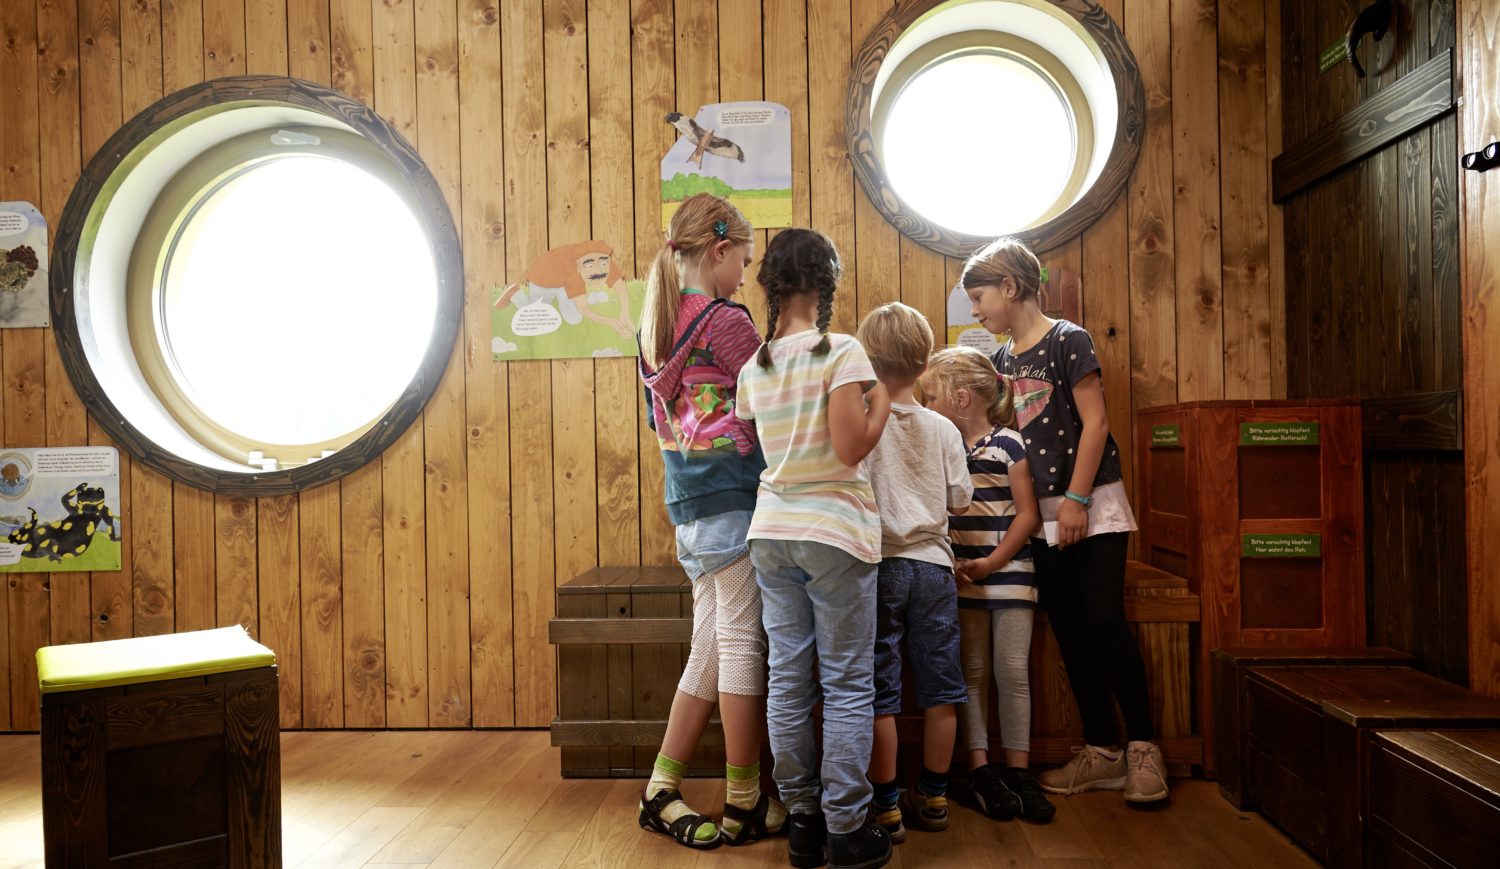 At the Arche Rhön visitor center, young guests can solve many puzzles © Samuel Zuder / Thüringer Tourismus GmbH